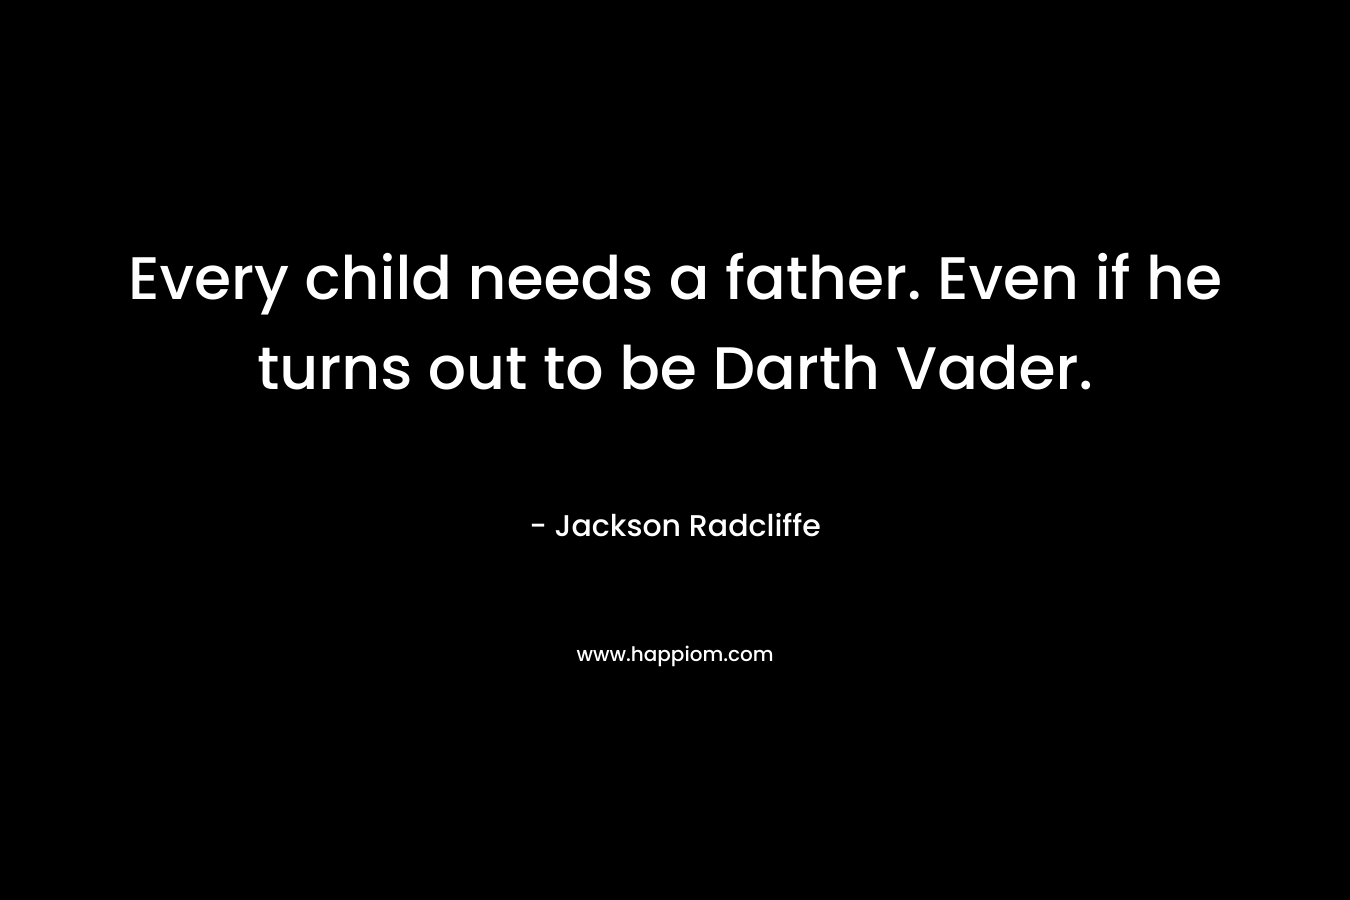 Every child needs a father. Even if he turns out to be Darth Vader.